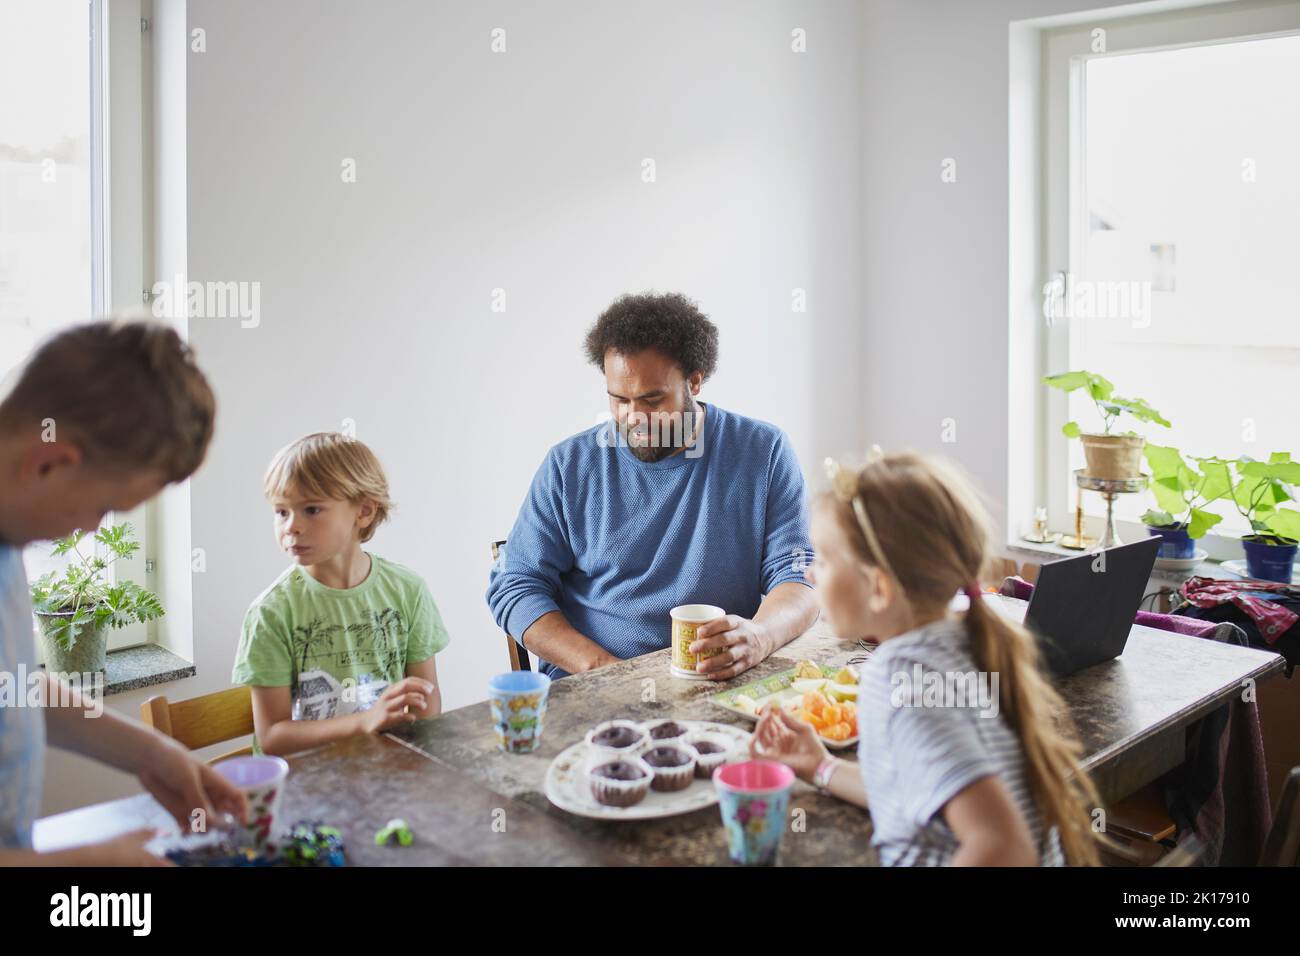 Father with children sitting at table and having snack Stock Photo